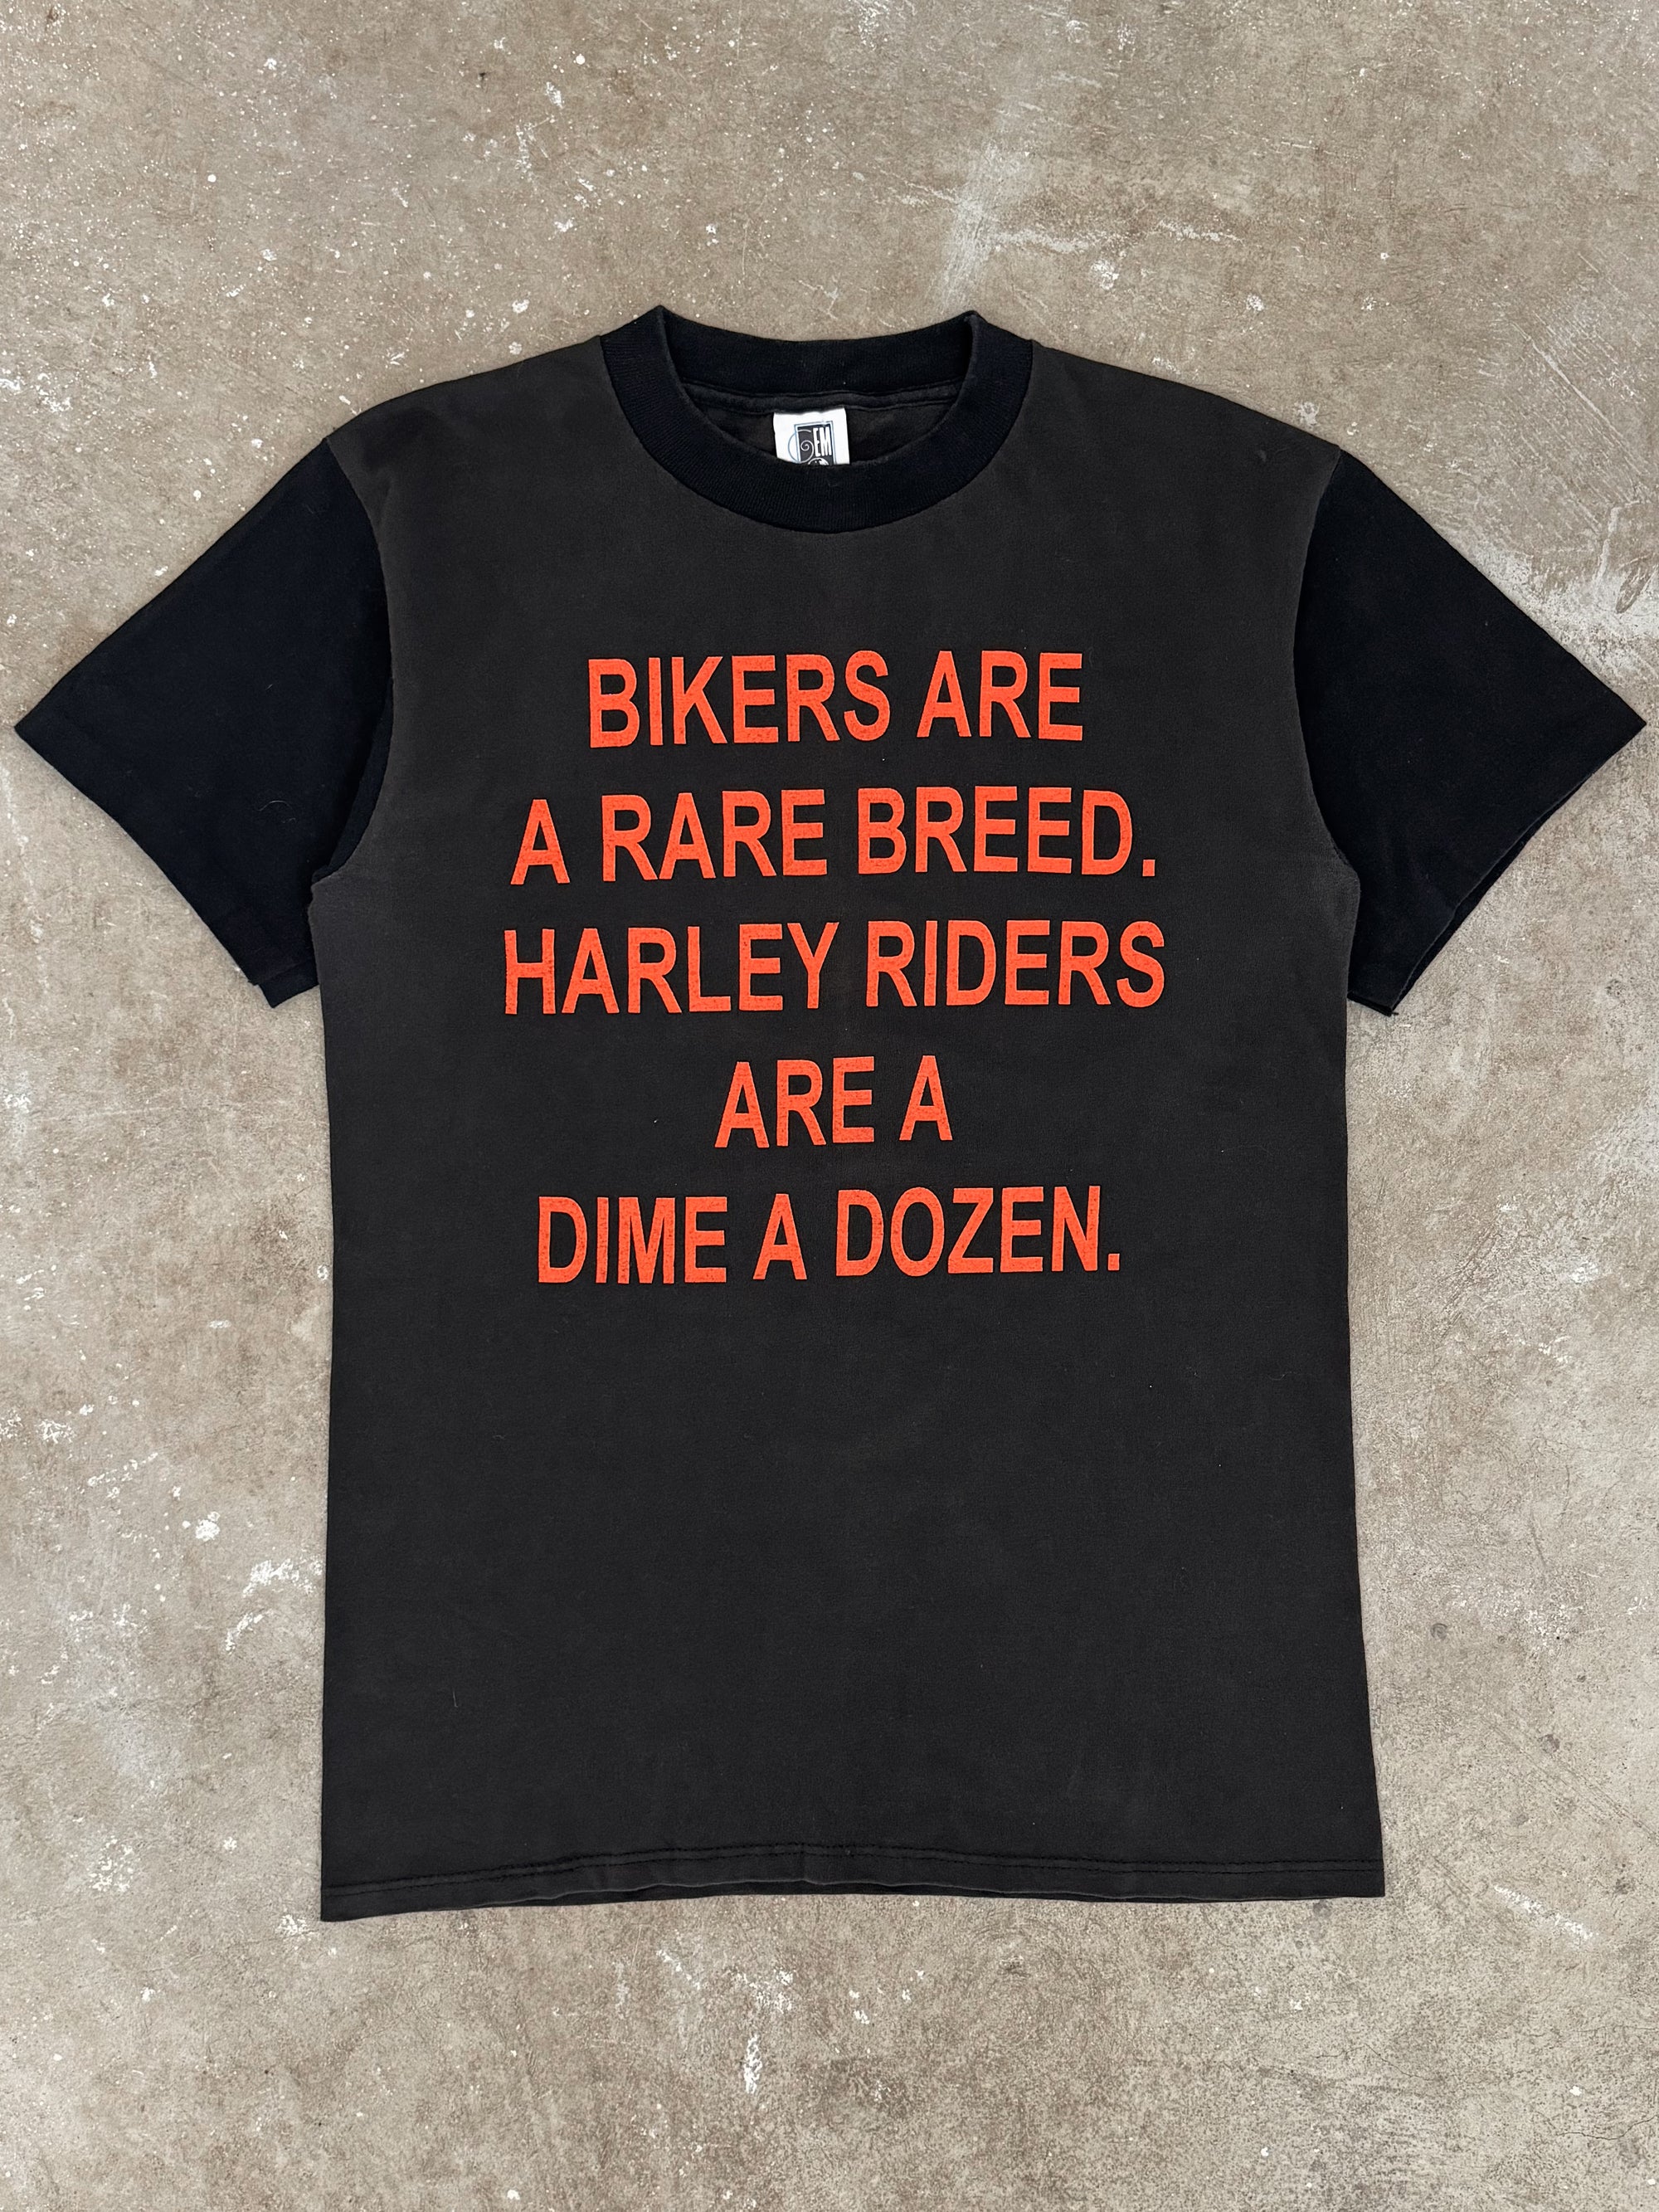 1990s "Bikers Are A Rare Breed" Tee (M)